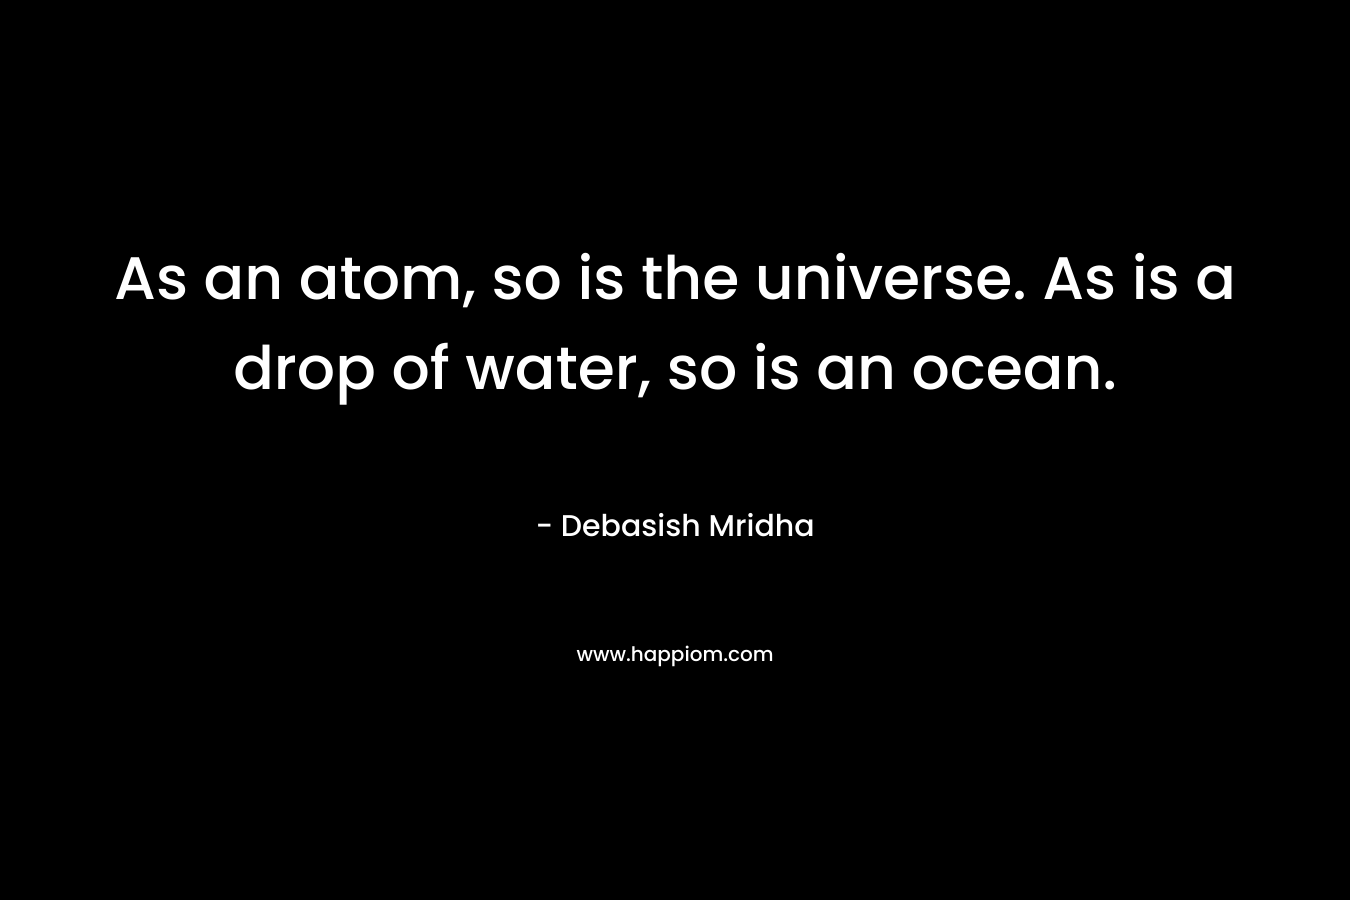 As an atom, so is the universe. As is a drop of water, so is an ocean.